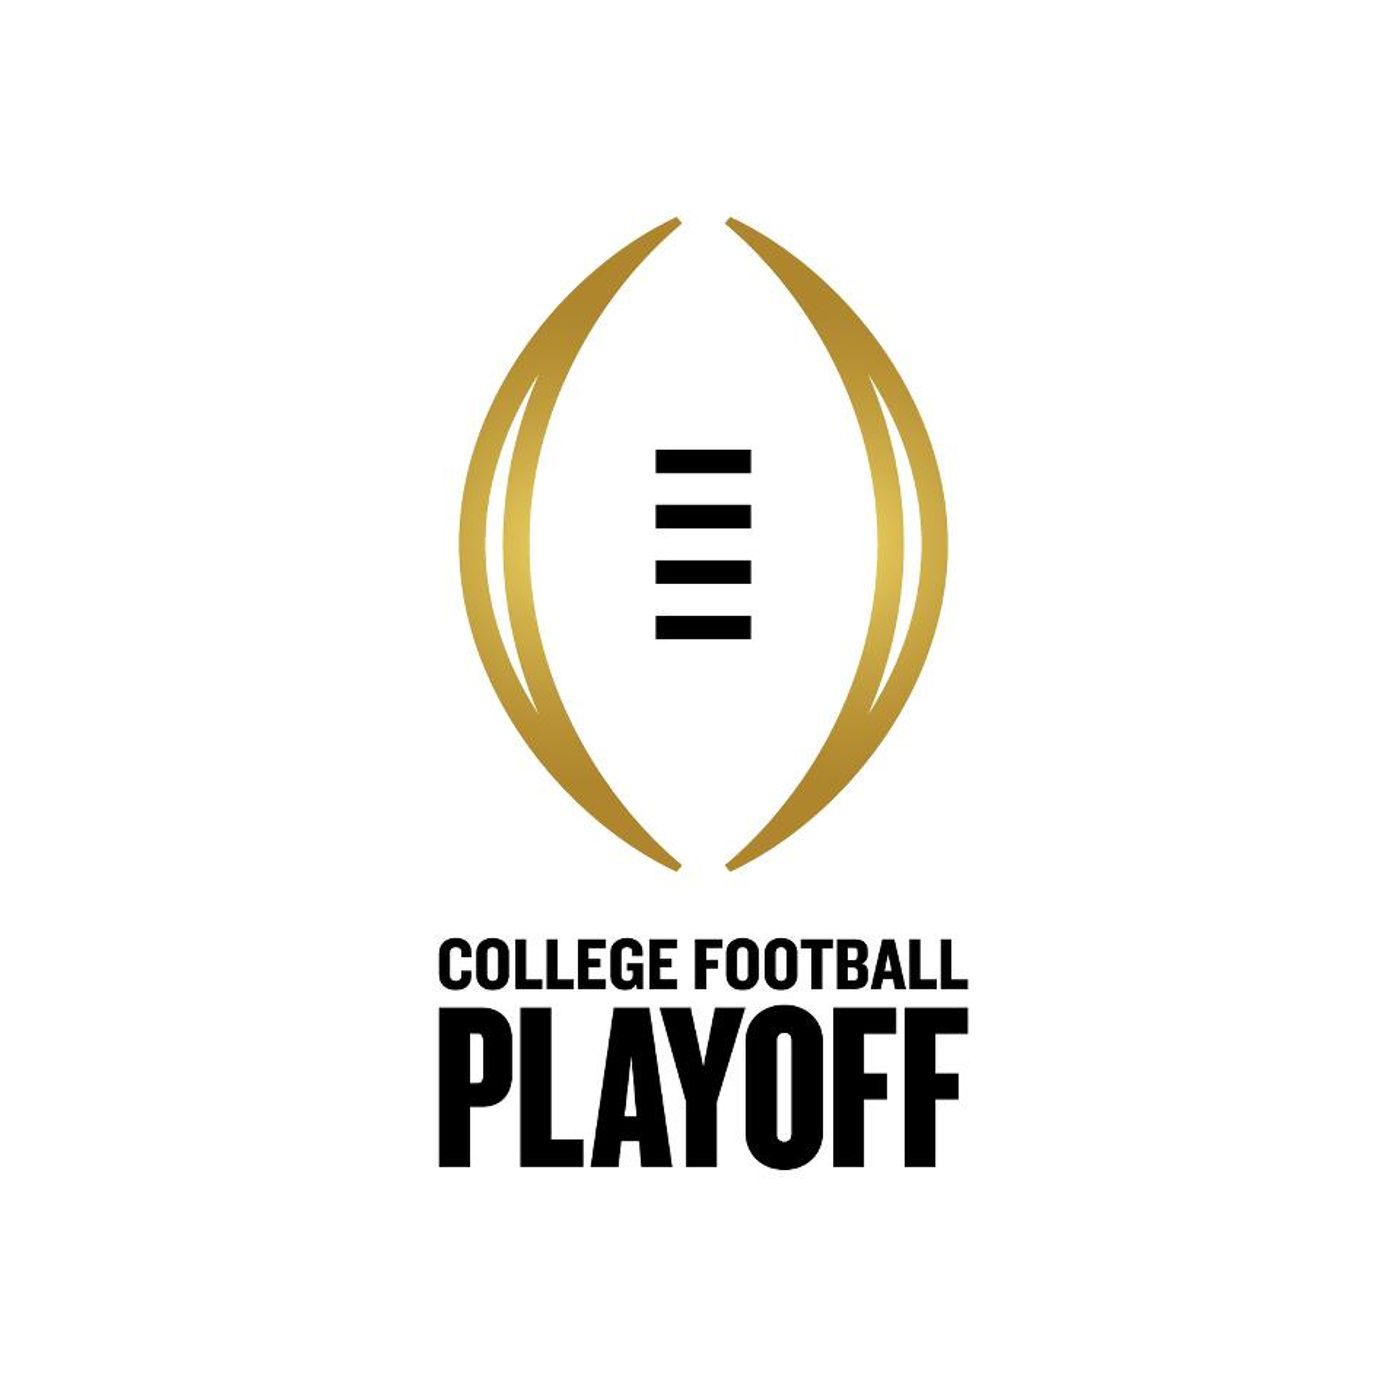 Episode 6: The College Football Playoff Championship Game and Bowl Season